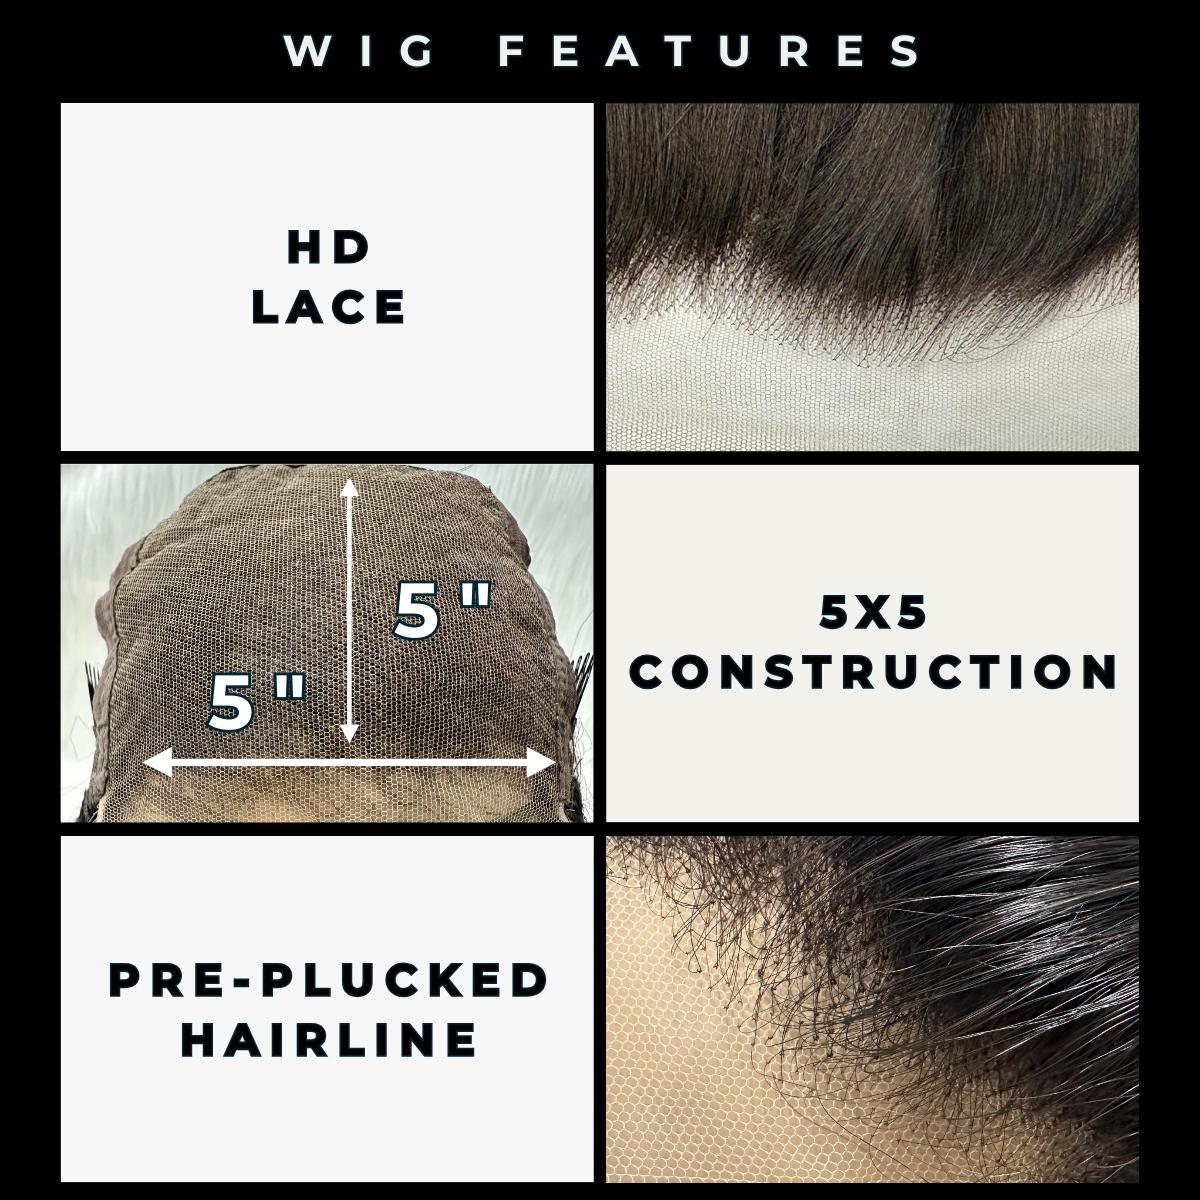 wig features-HD Lace- 5x5 construction- pre-plucked hairline